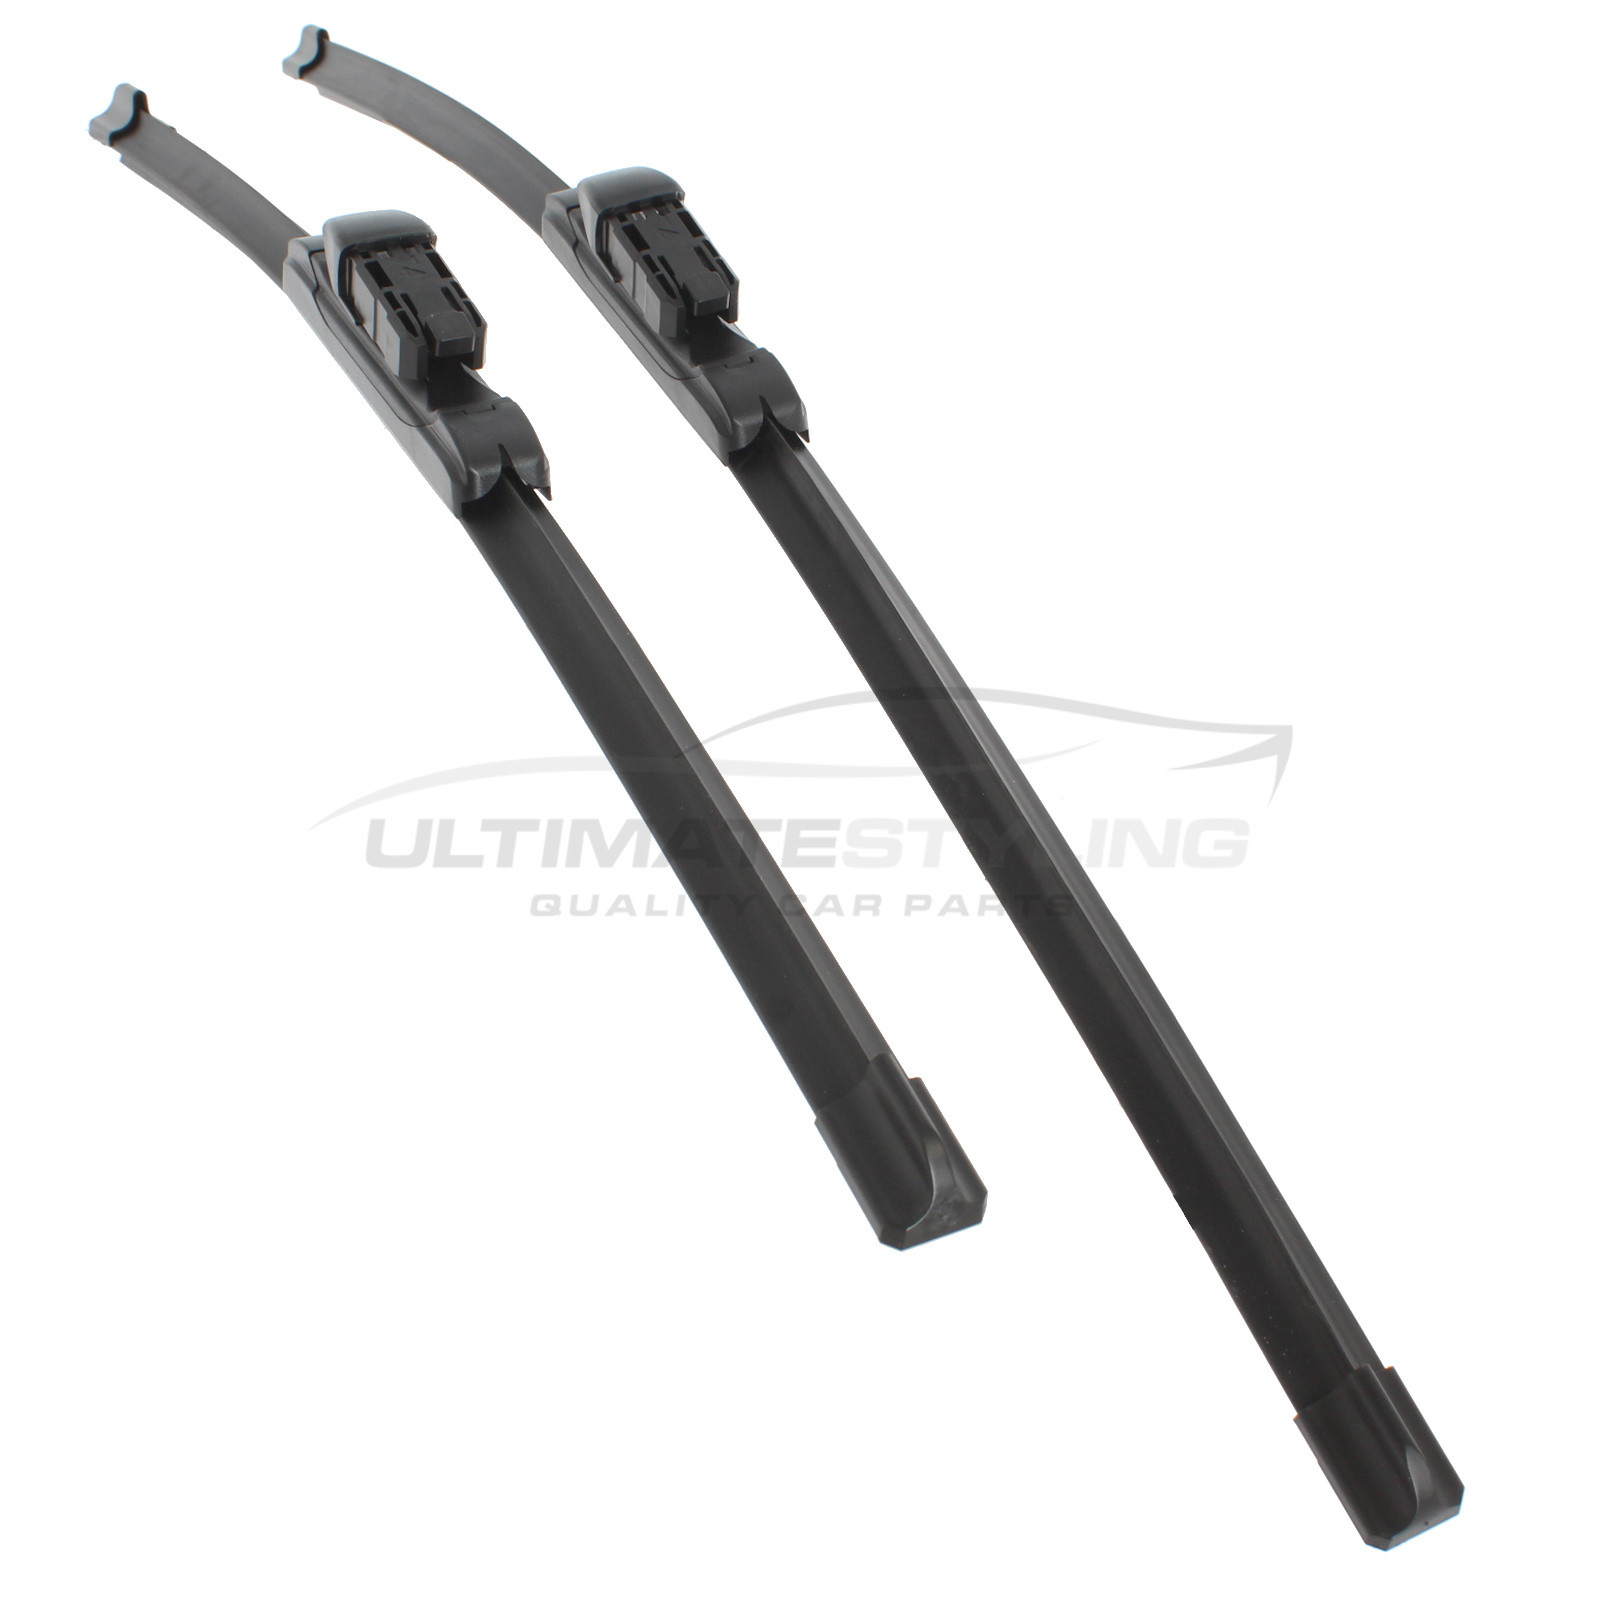 Drivers Side & Passenger Side (Front) Wiper Blades for Fiat Bravo